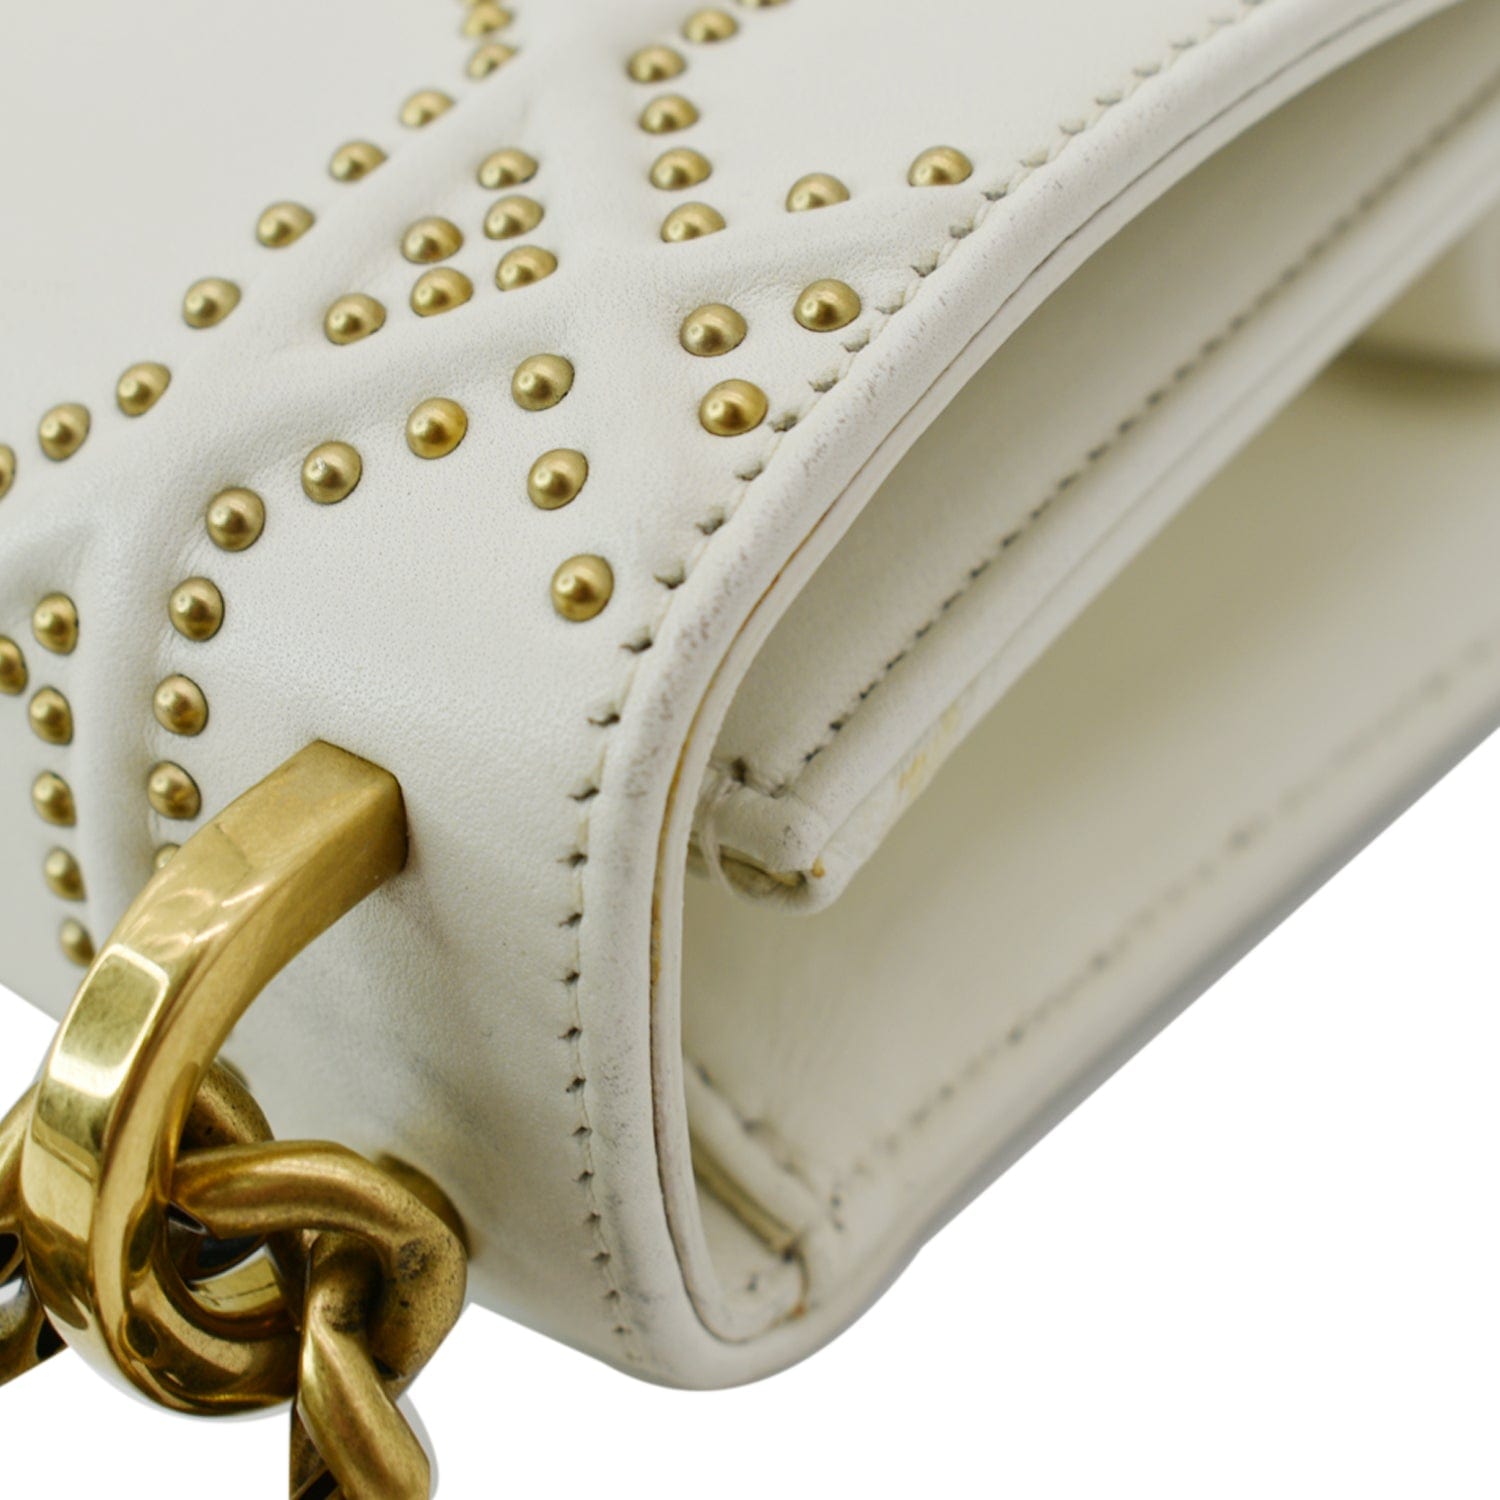 CHRISTIAN DIOR Small Diorama Studded Leather Flap Shoulder Bag White